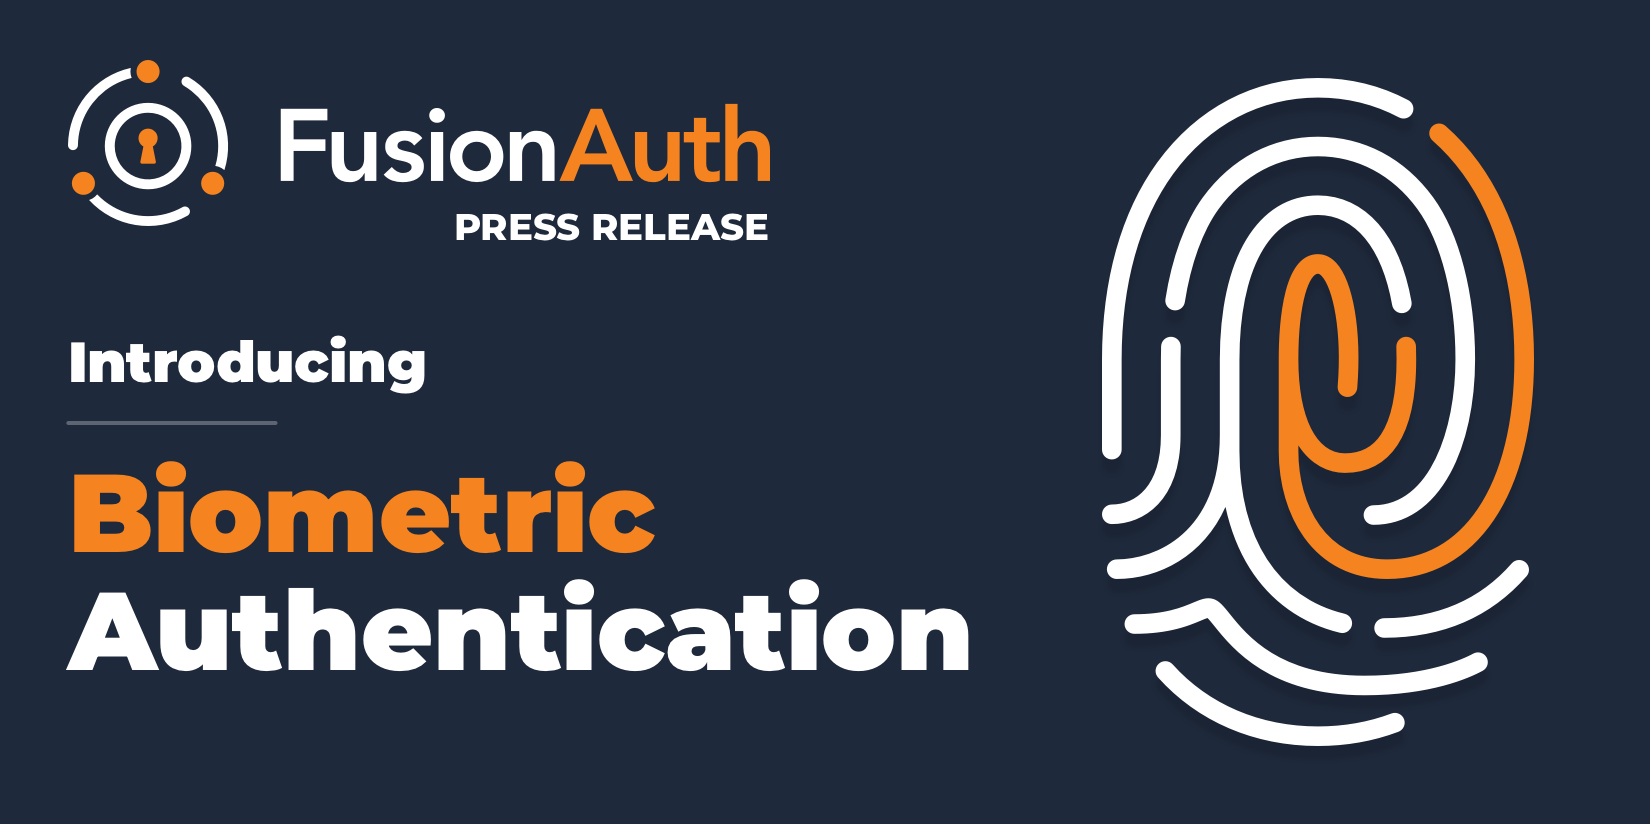 Introducing biometric authentication